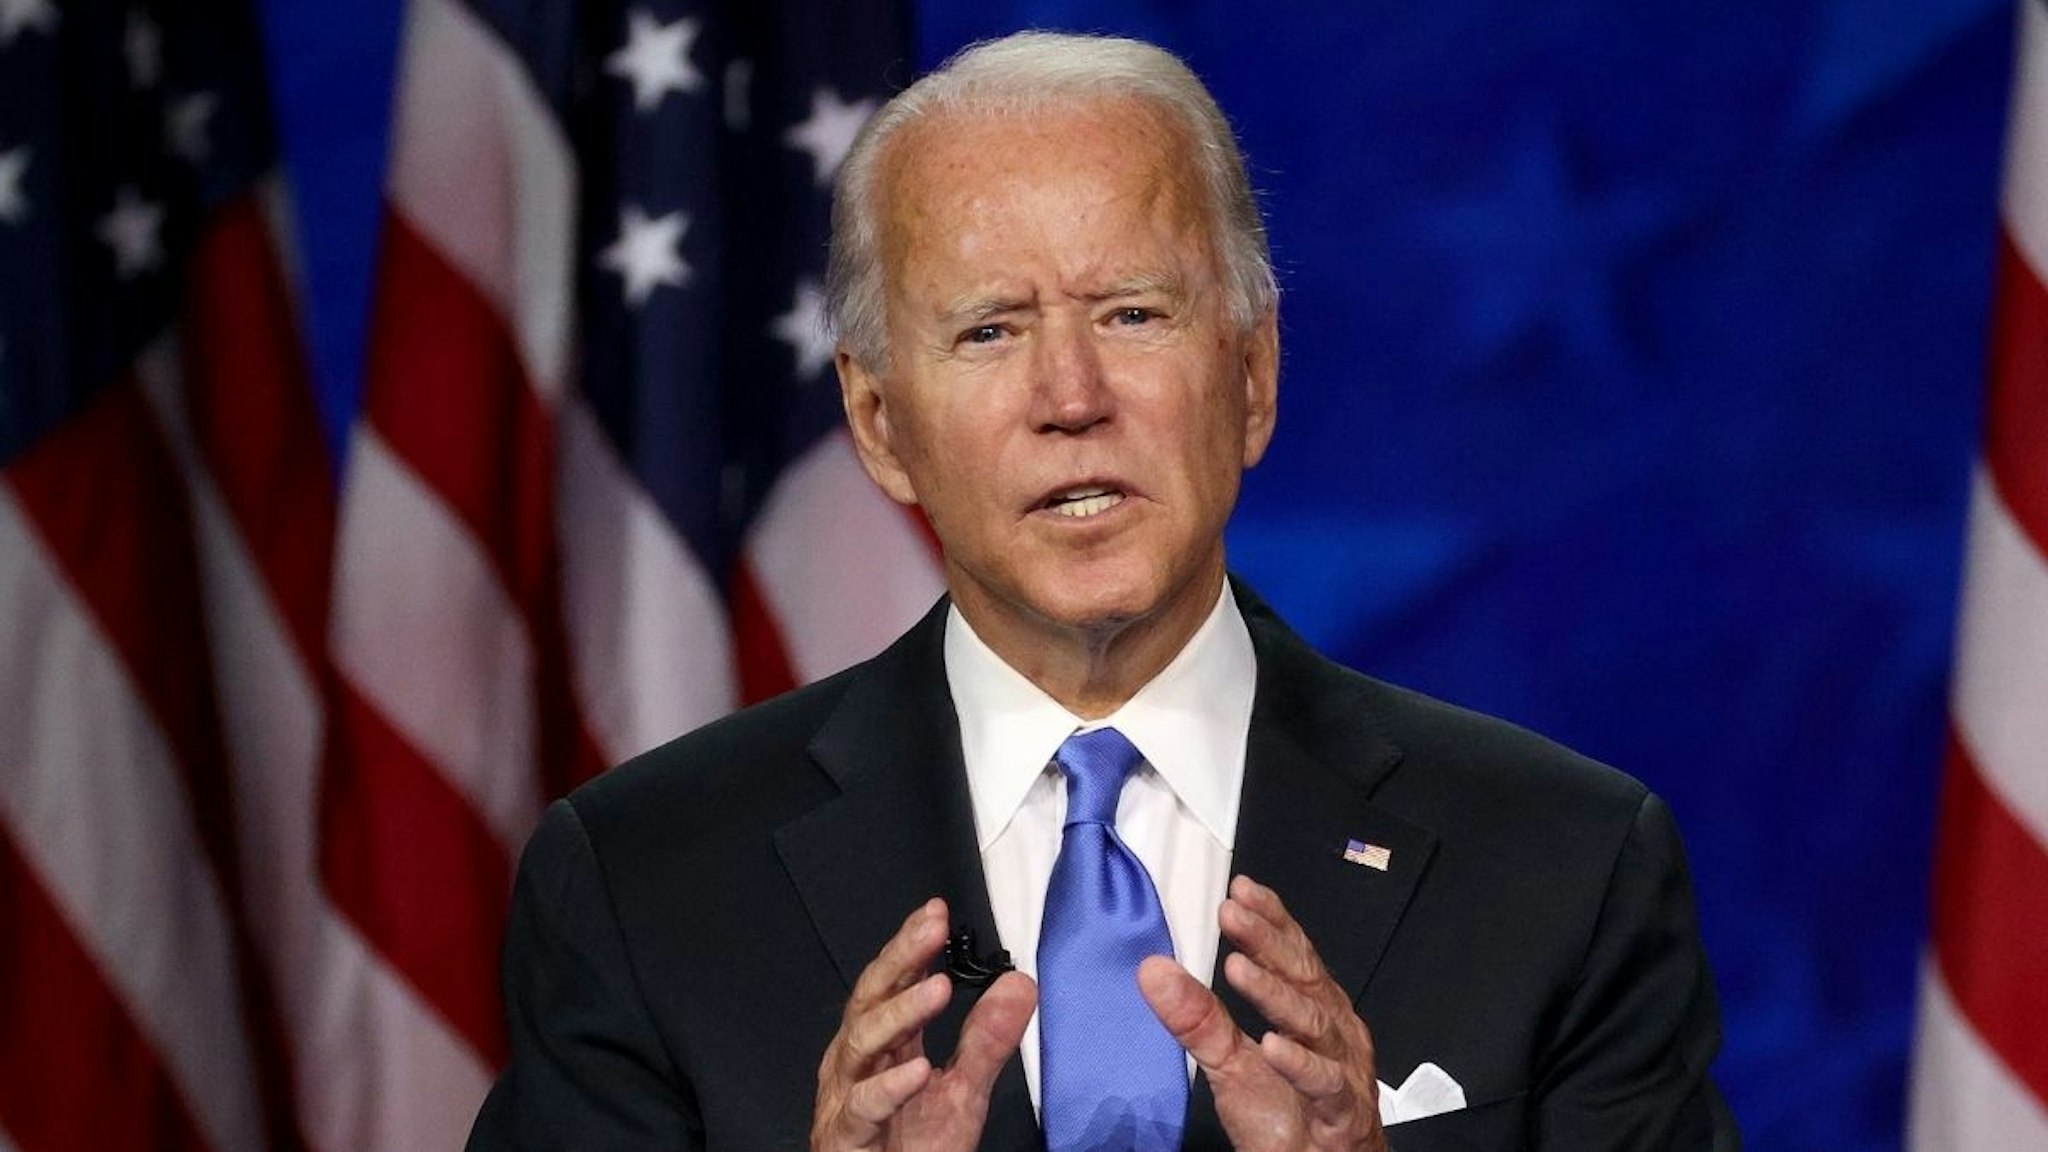 Democratic presidential nominee Joe Biden delivers his acceptance speech on the fourth night of the Democratic National Convention from the Chase Center on August 20, 2020 in Wilmington, Delaware.